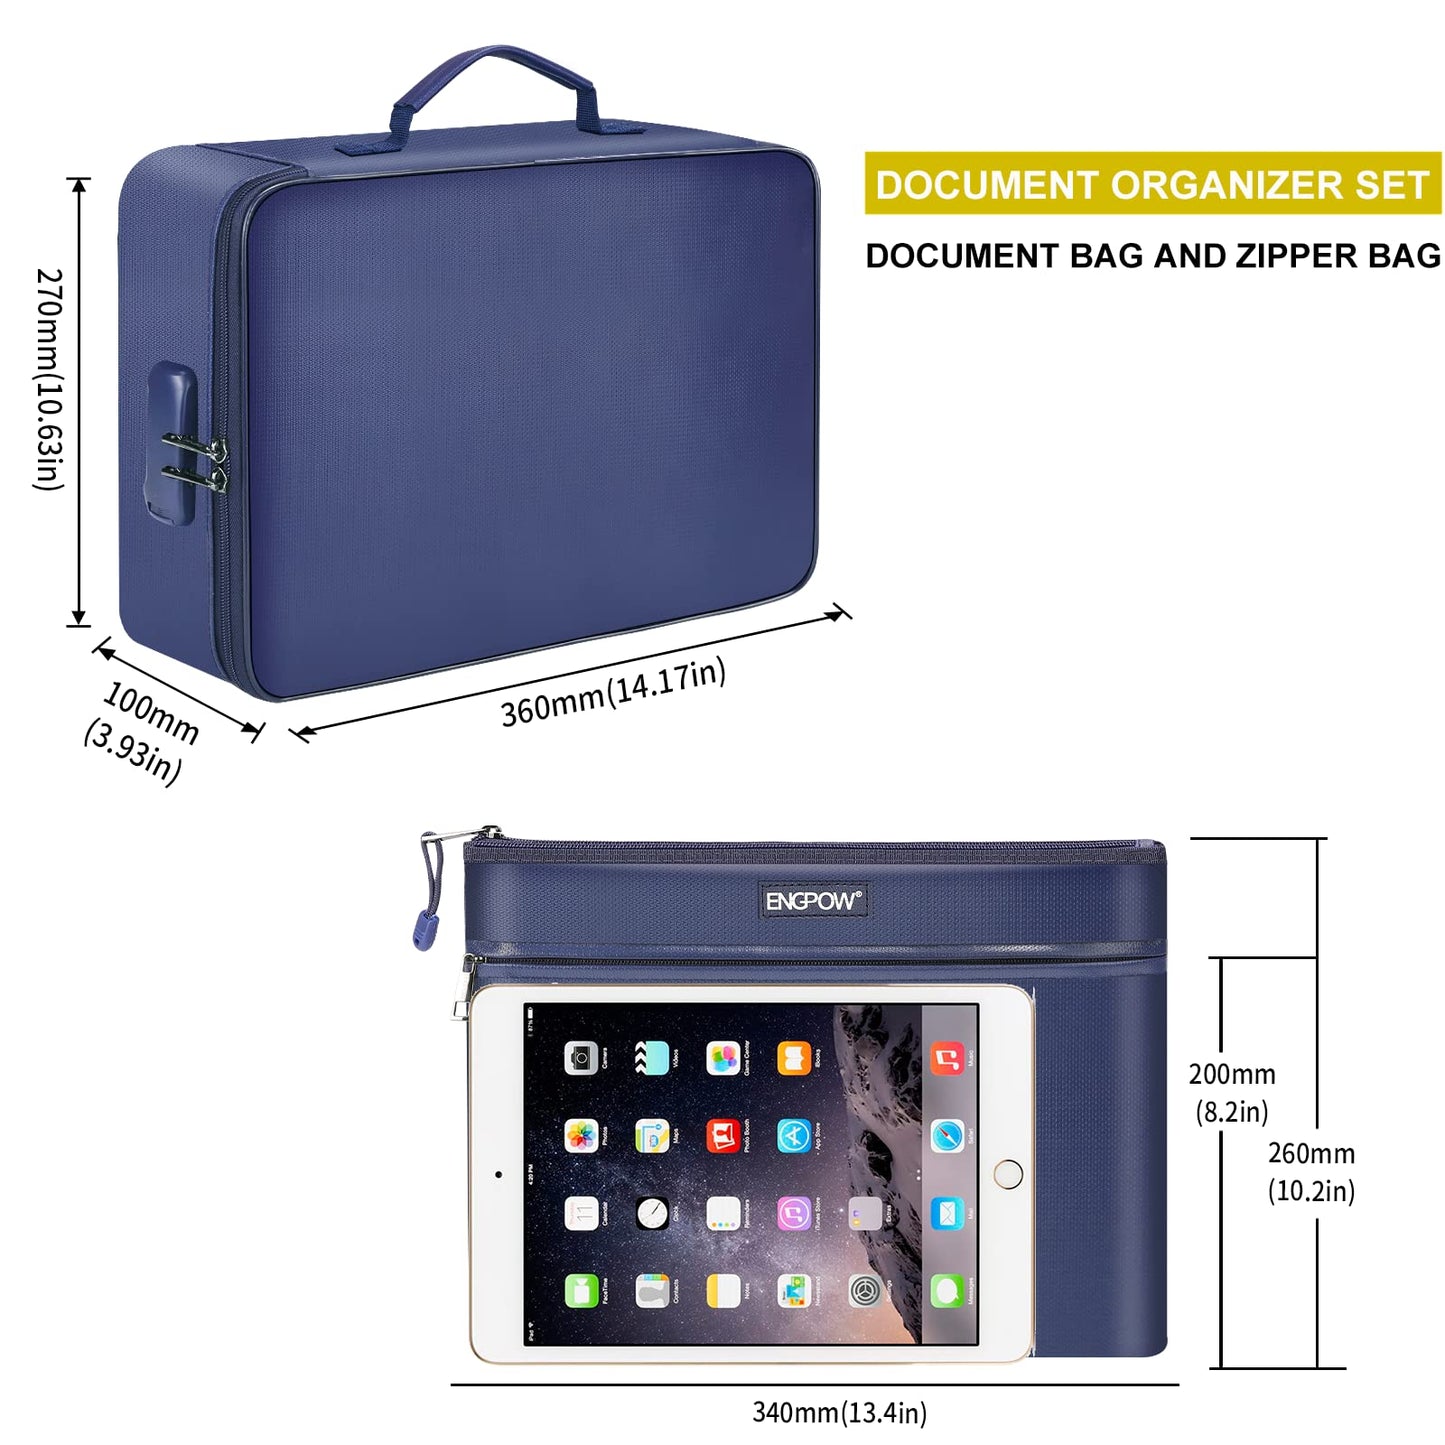 Document Storage Bag, Fire Resistant Document Bag with Money Pocket, Home Office Travel Security Bag with Lock, Multi-Layered Portable Document Storage Important Documents Passport Certificates Legal Documents